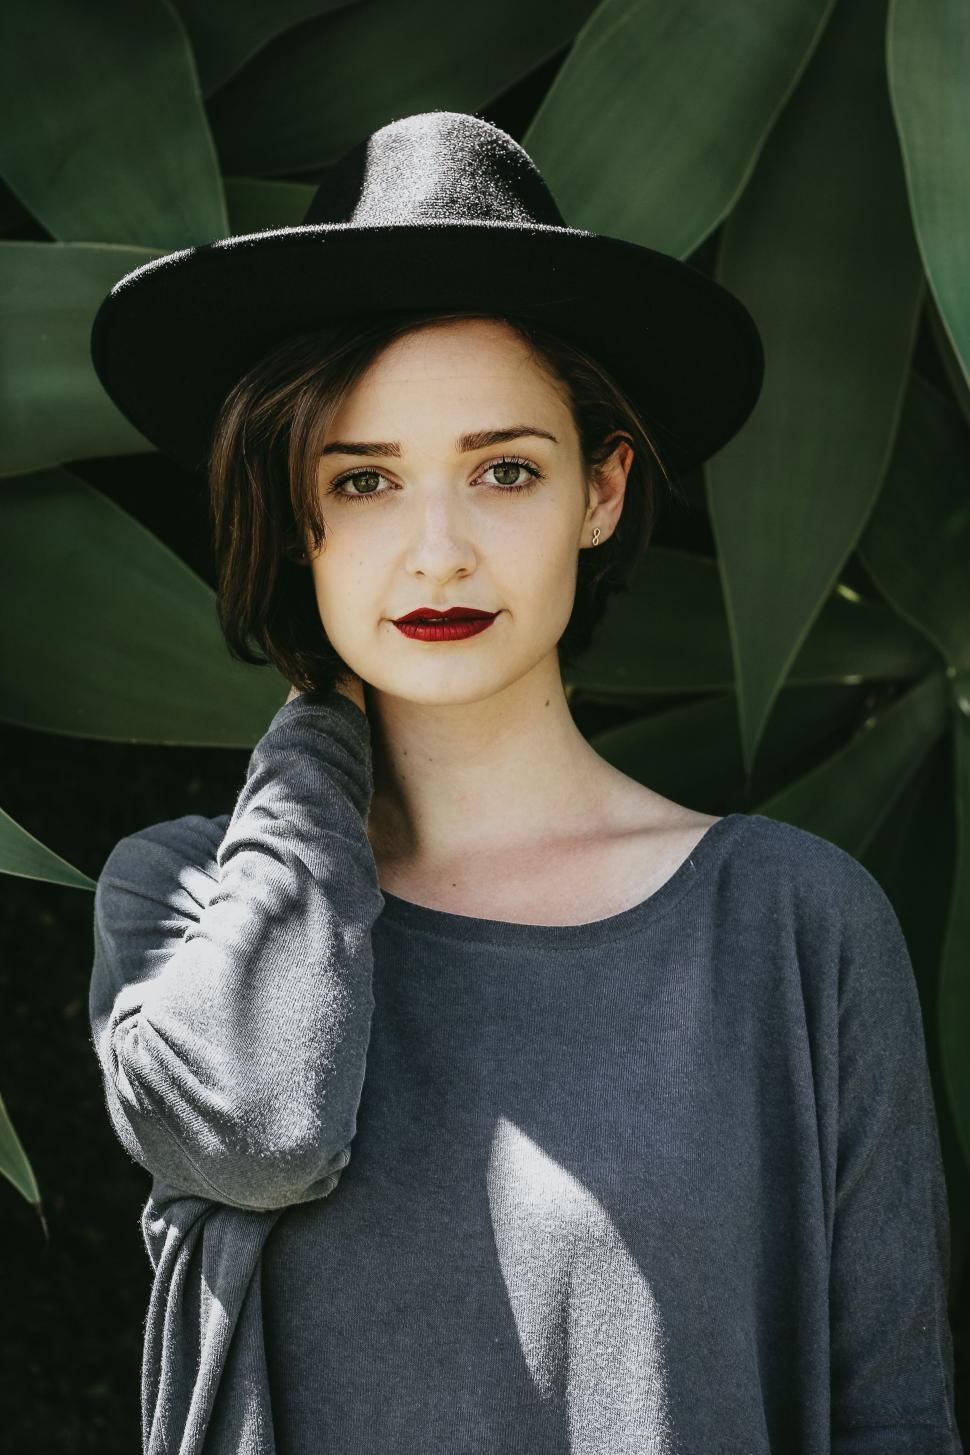 Free Image of Woman Wearing Black Hat and Gray Shirt 